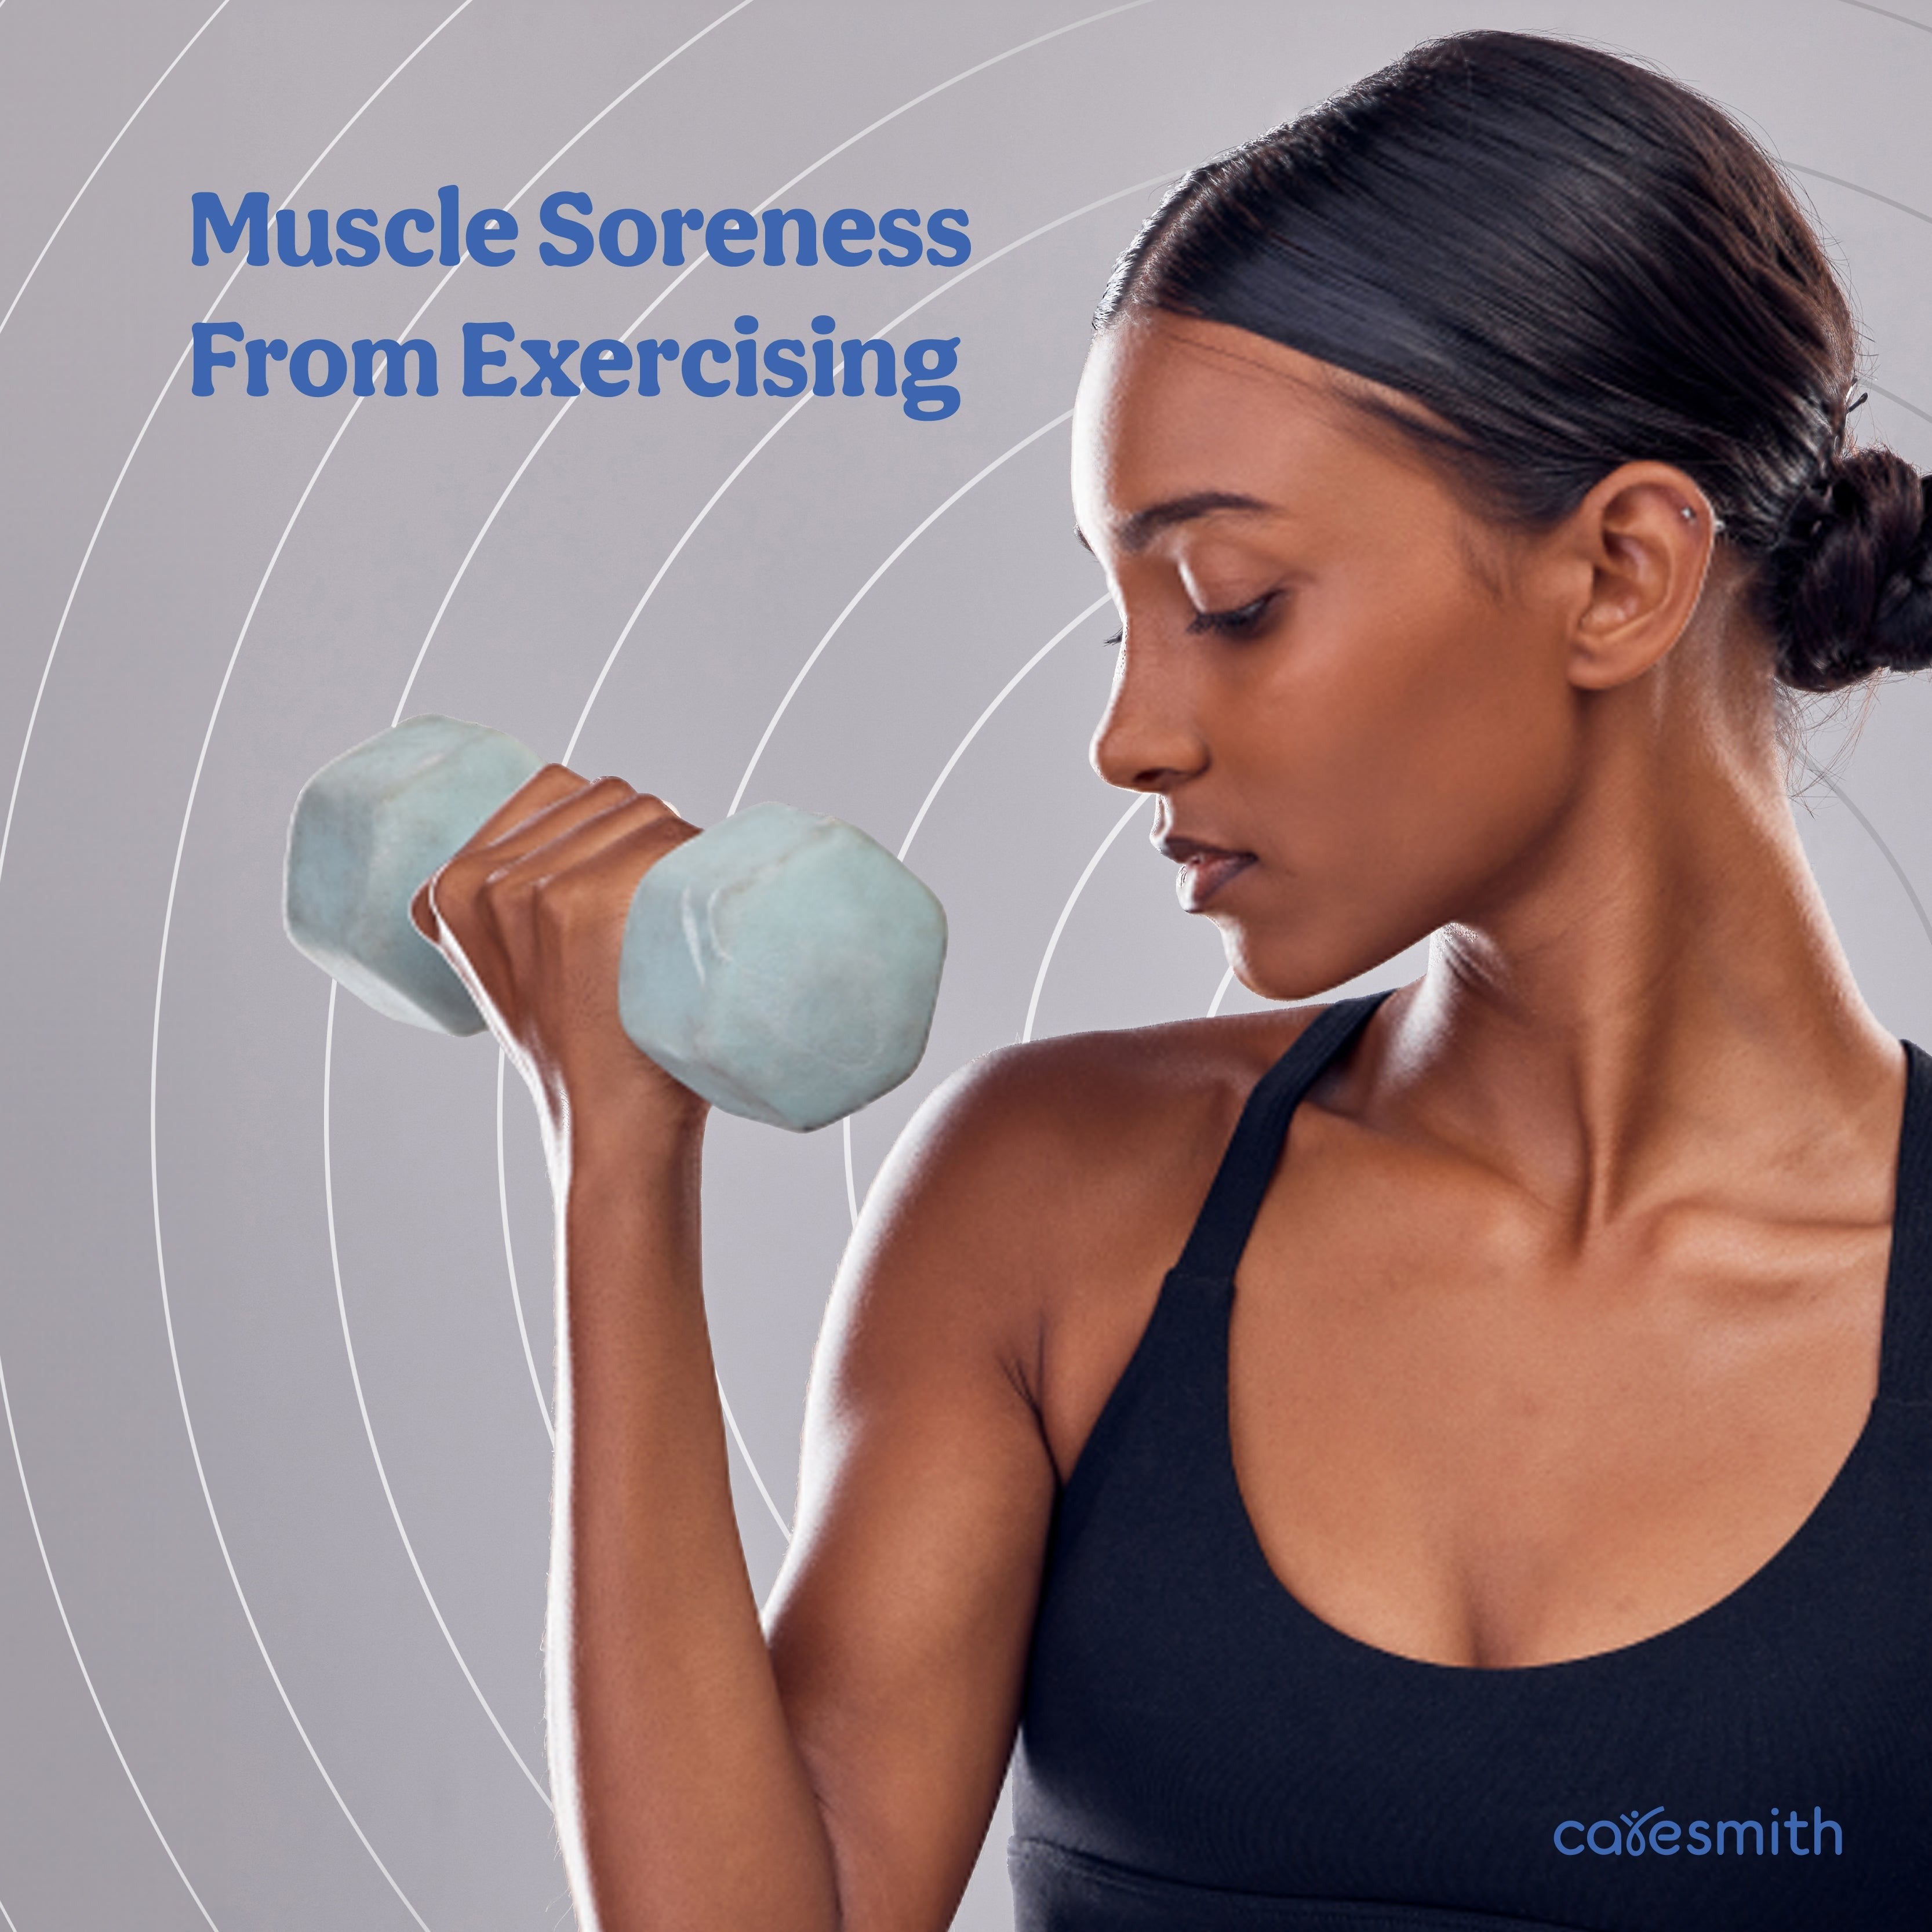 Muscle Soreness due to Exercising